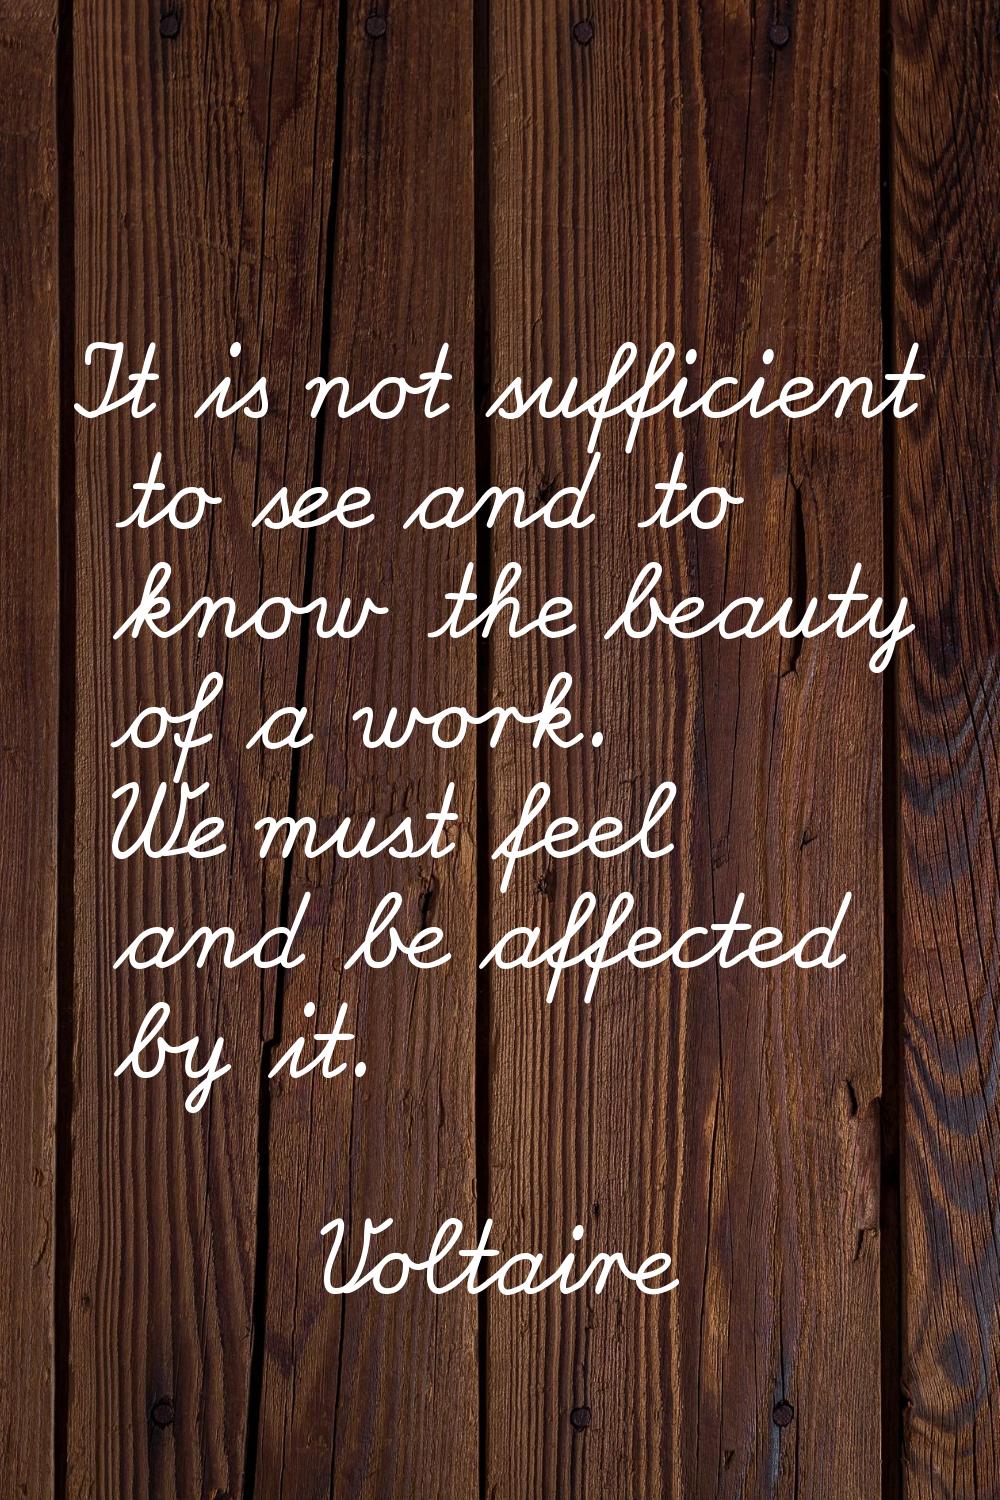 It is not sufficient to see and to know the beauty of a work. We must feel and be affected by it.